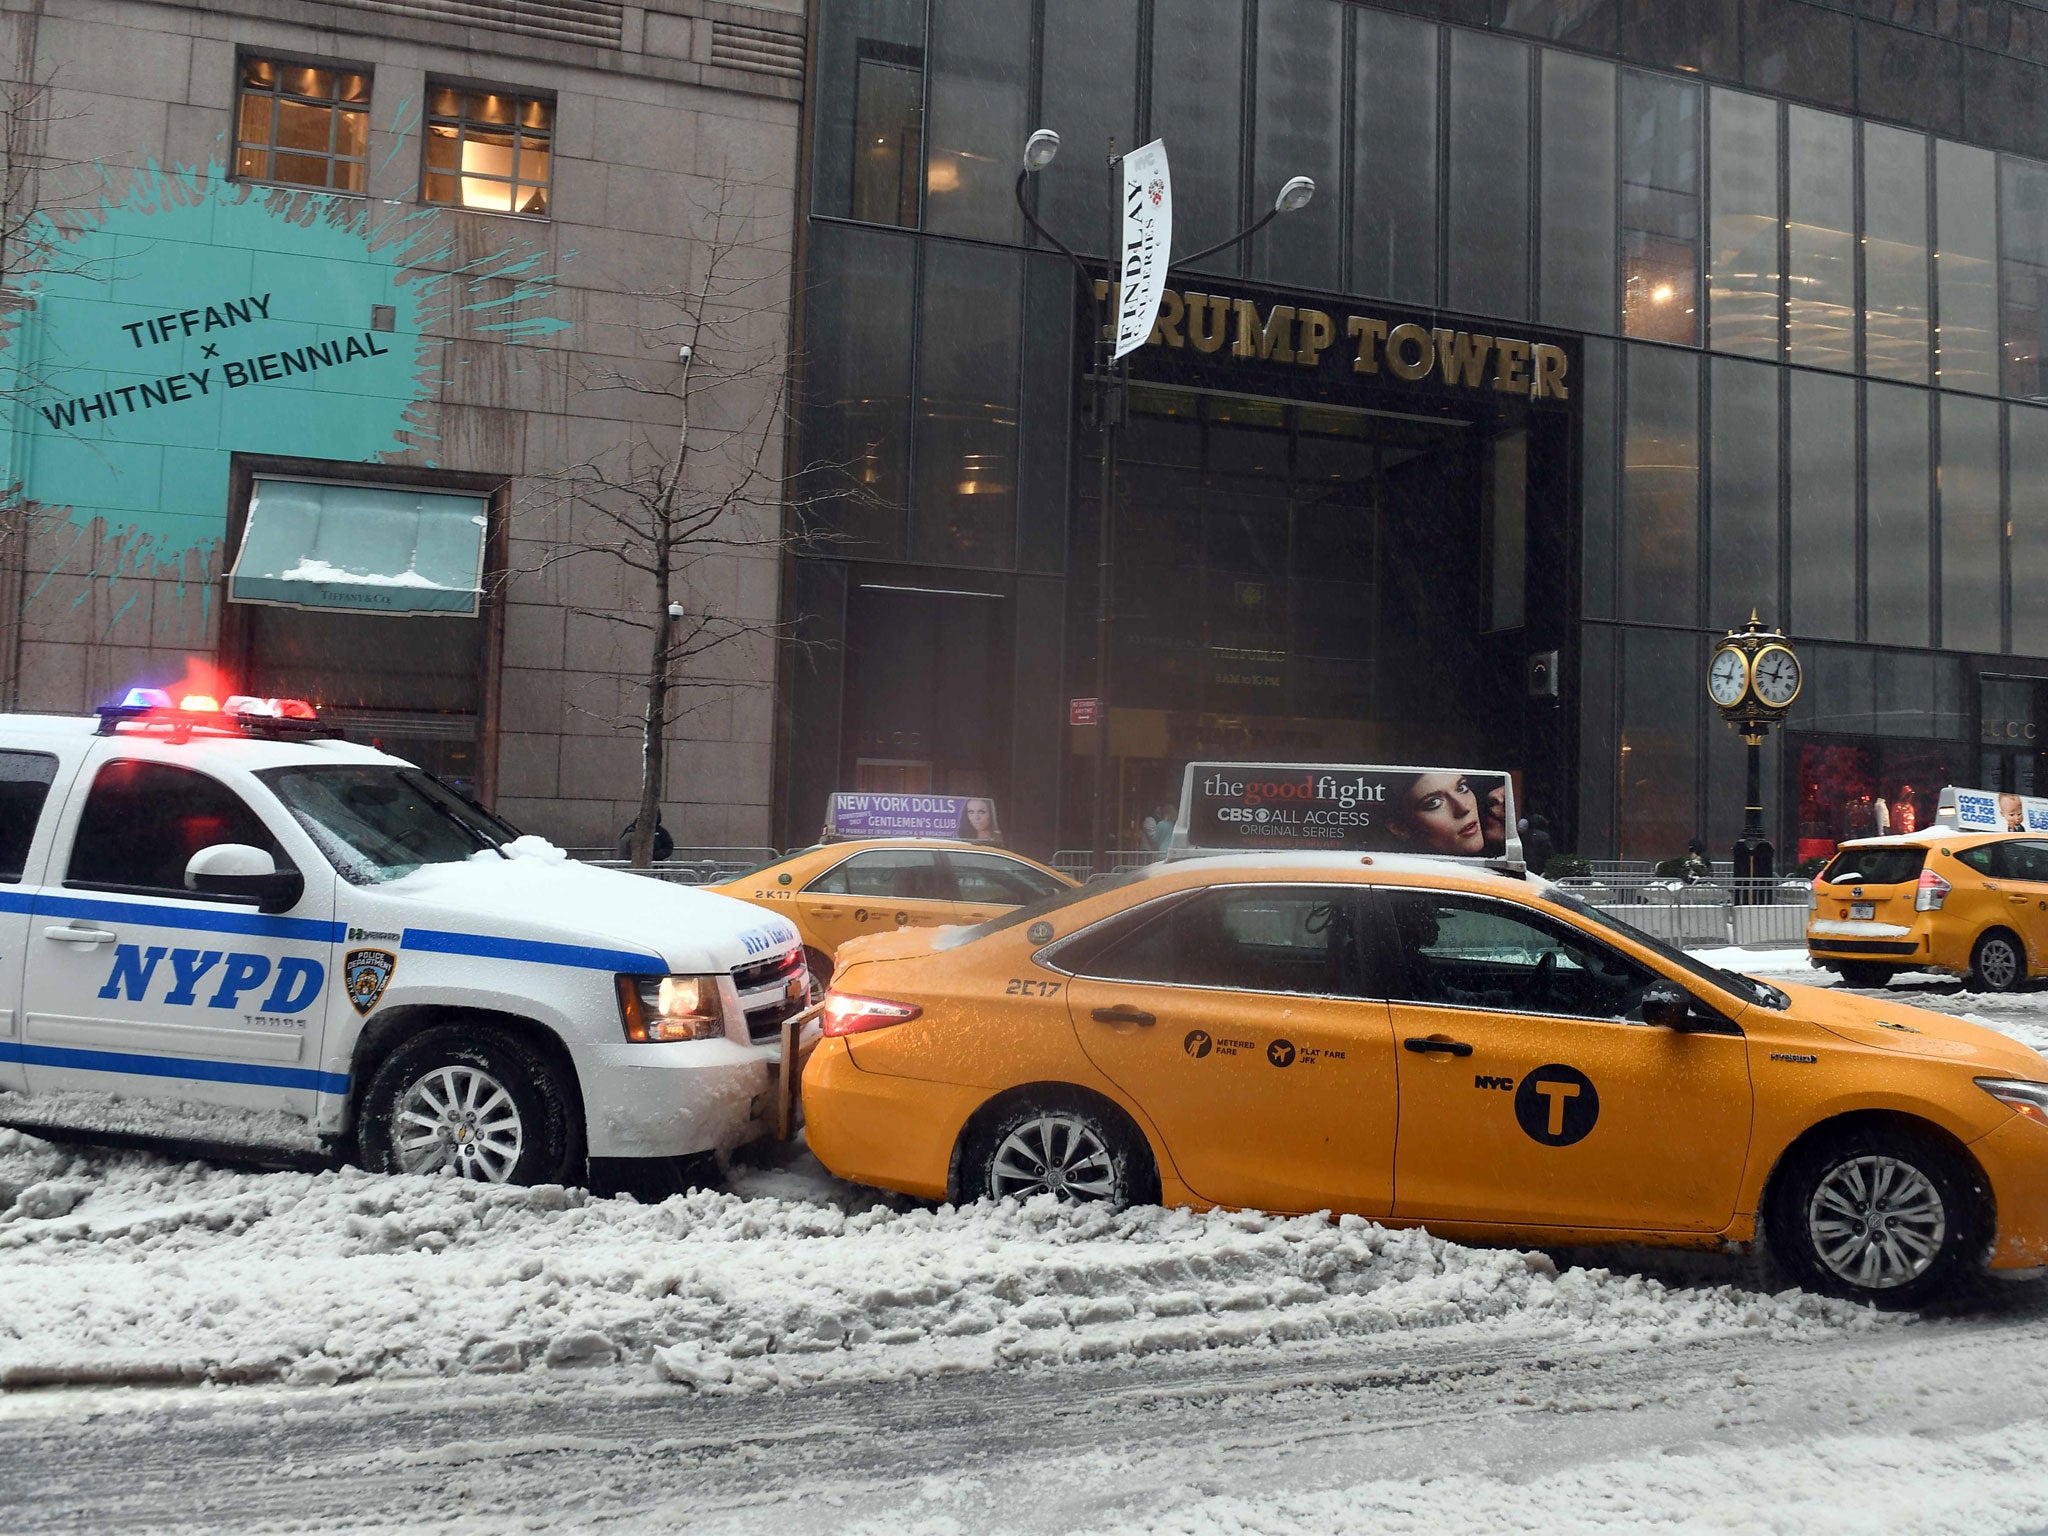 A police car pushes a cab stuck on a snow and sleet-covered street in New York